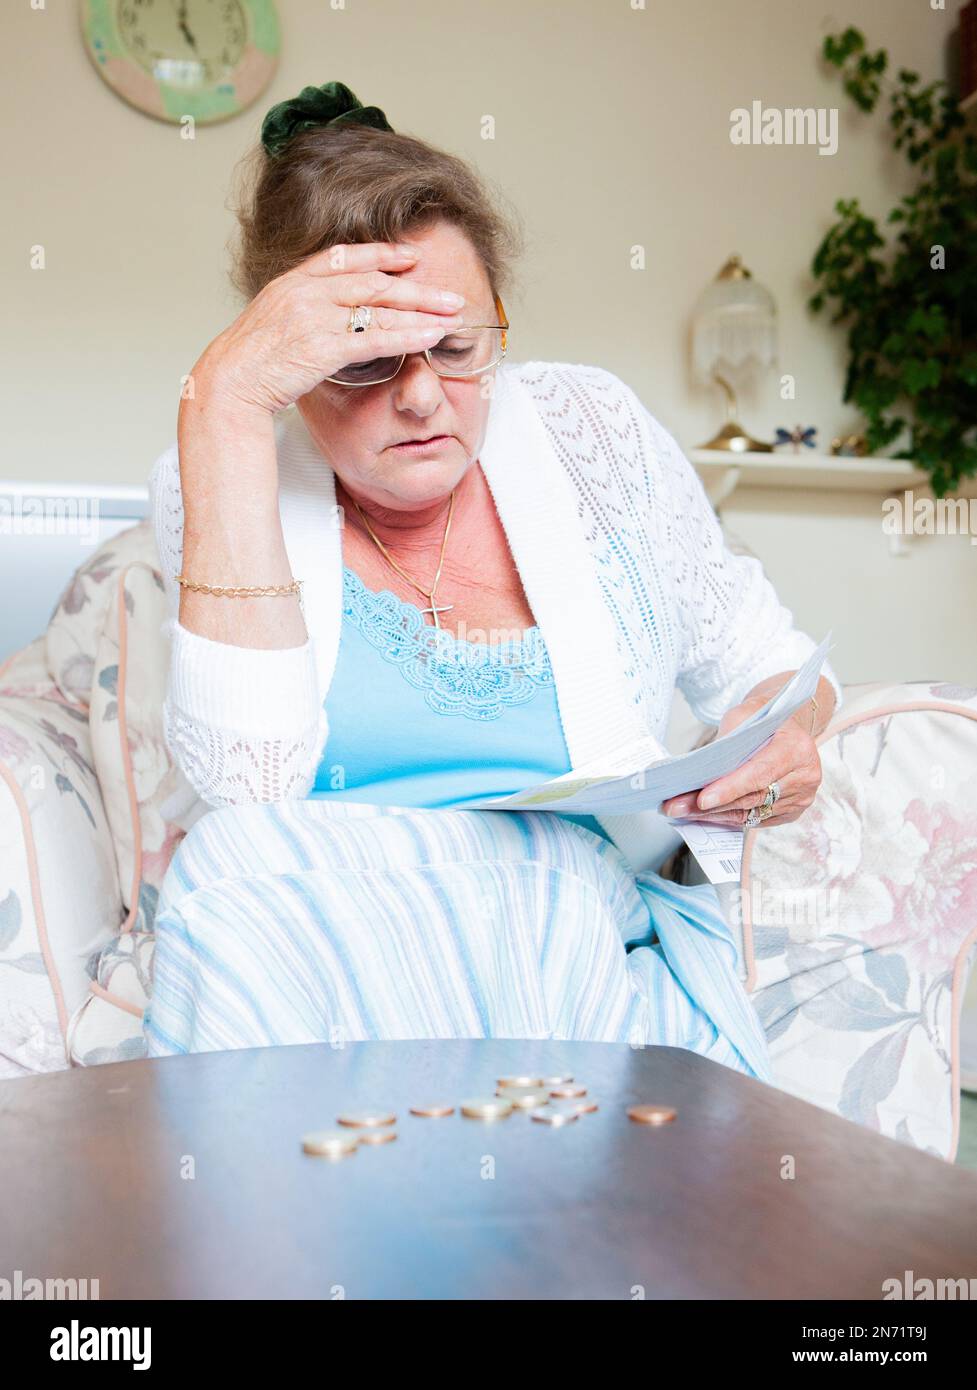 Retirement: Cost of Living. A senior lady frustrated by the rising cost of her domestic bills. From a series of related images. Stock Photo